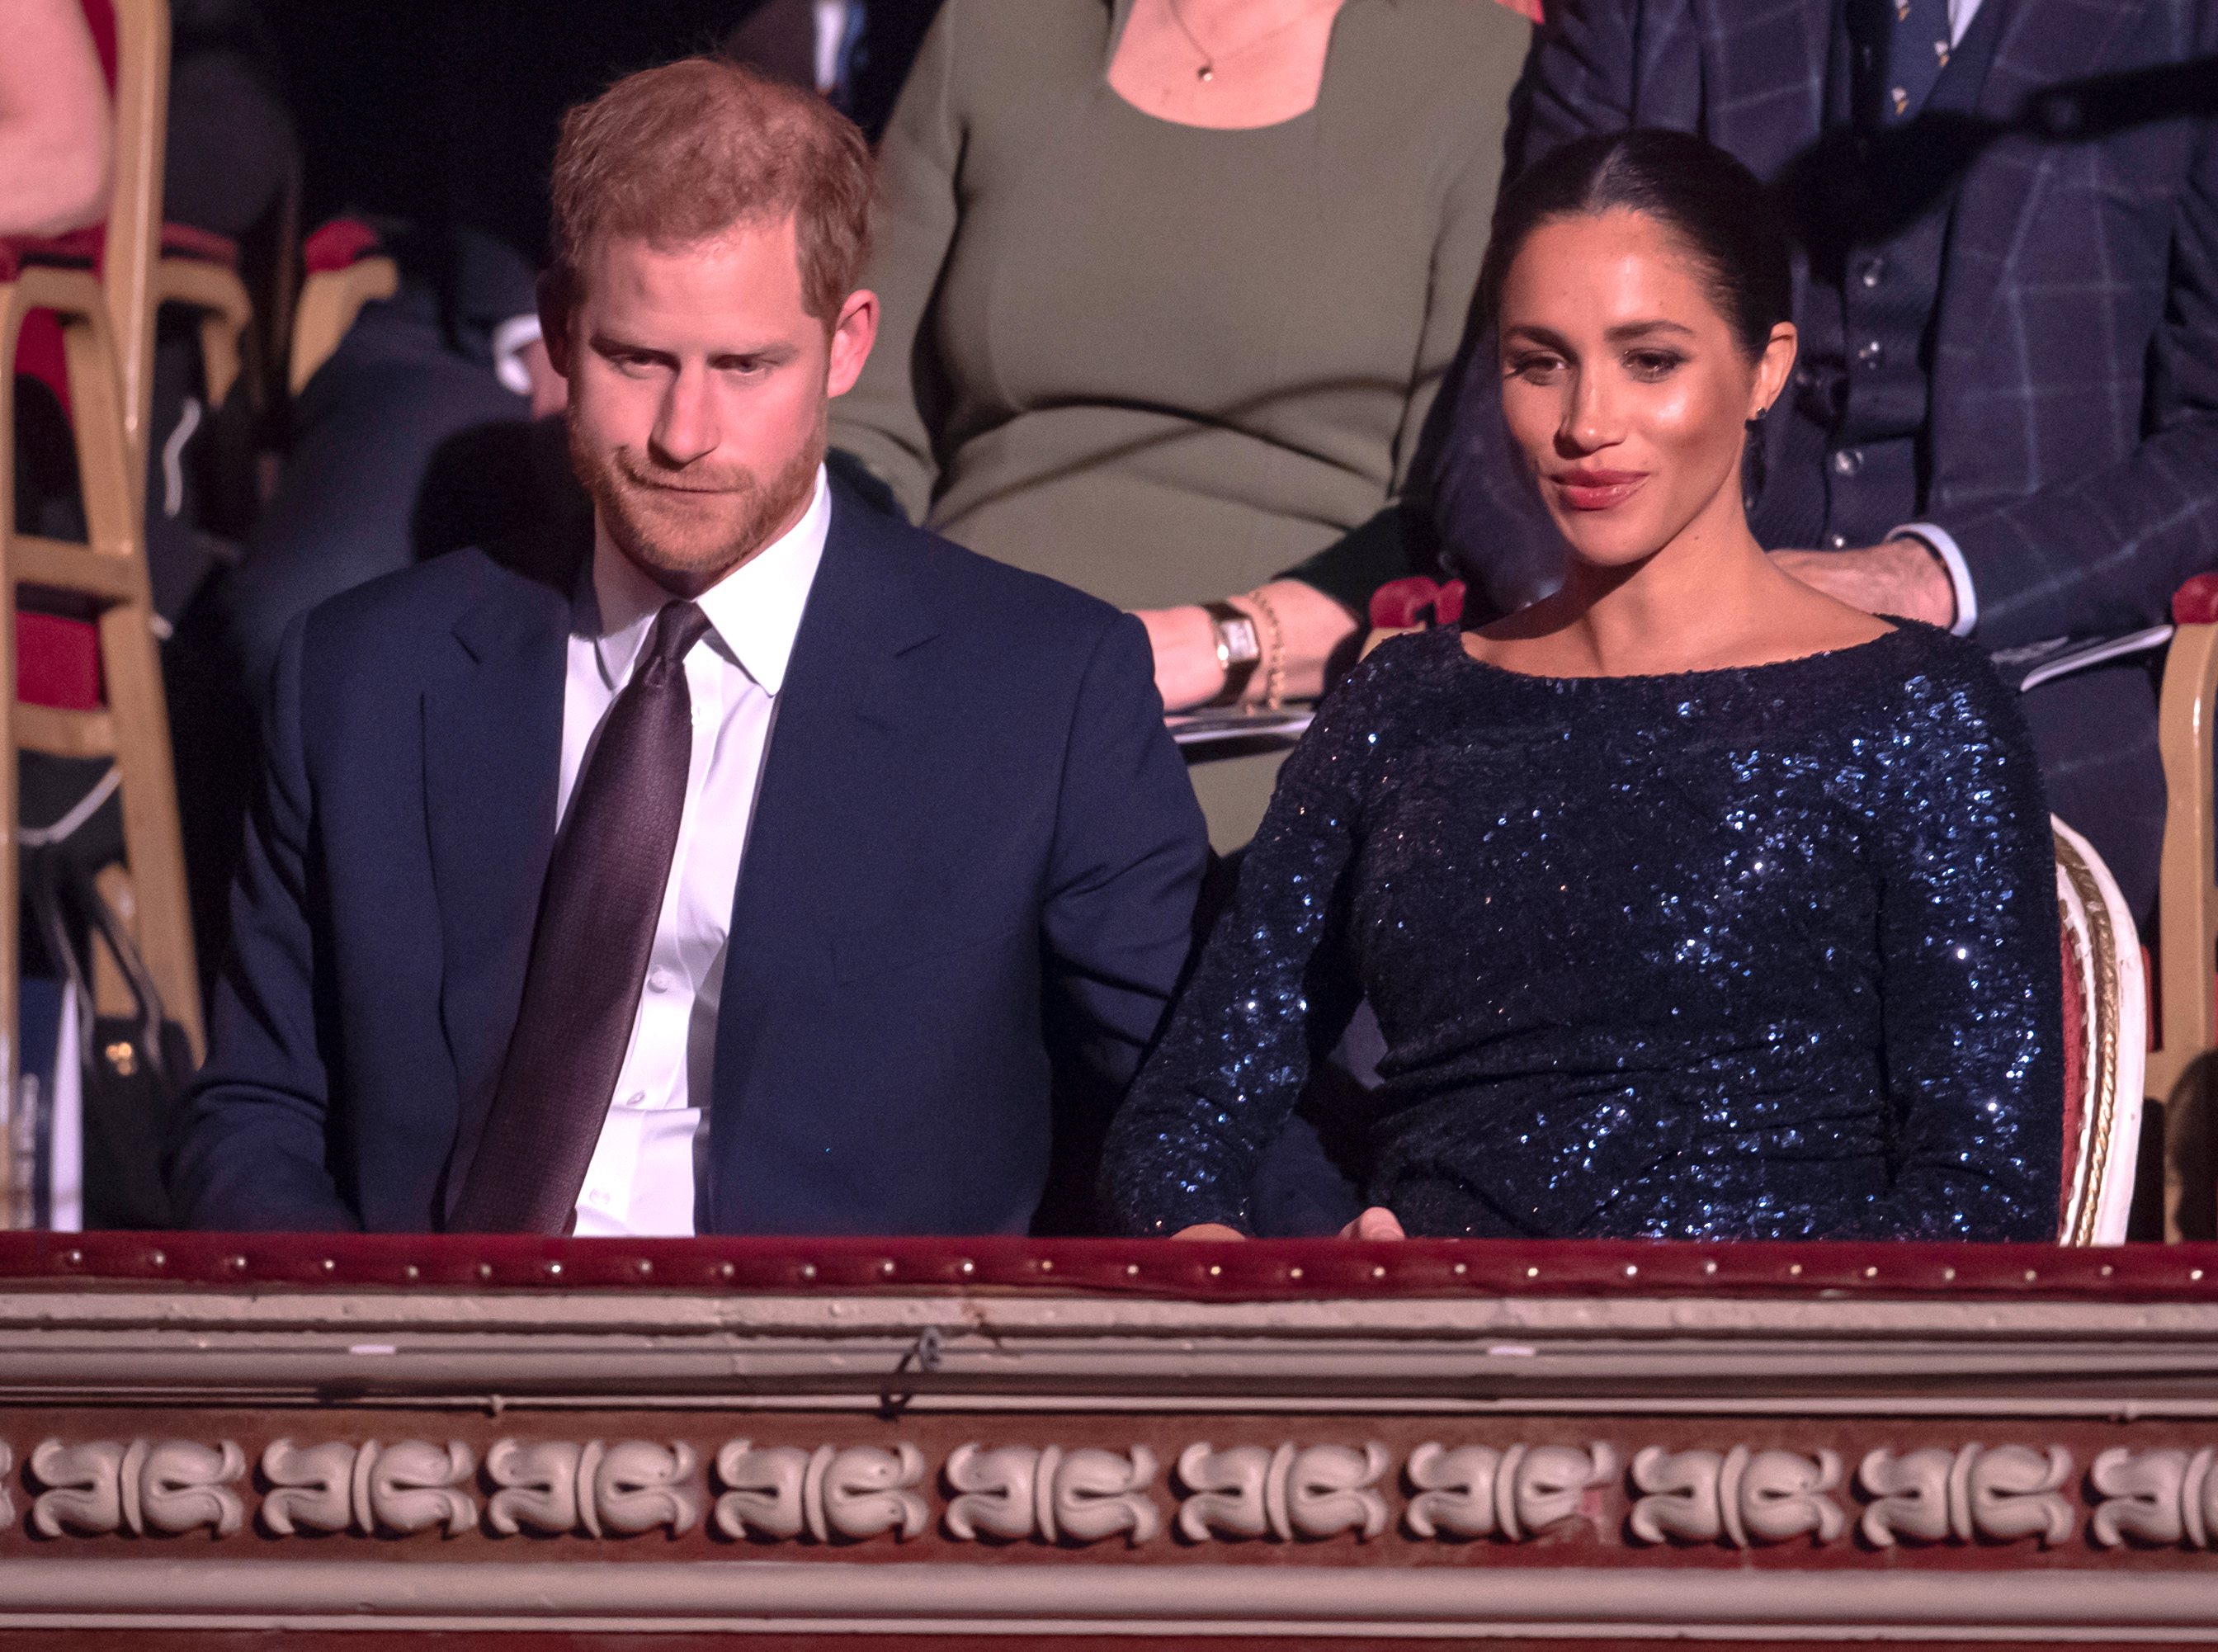 The Duke And Duchess Of Sussex Attend The Cirque du Soleil Premiere Of &quot;TOTEM&quot; In Support Of Sentebale